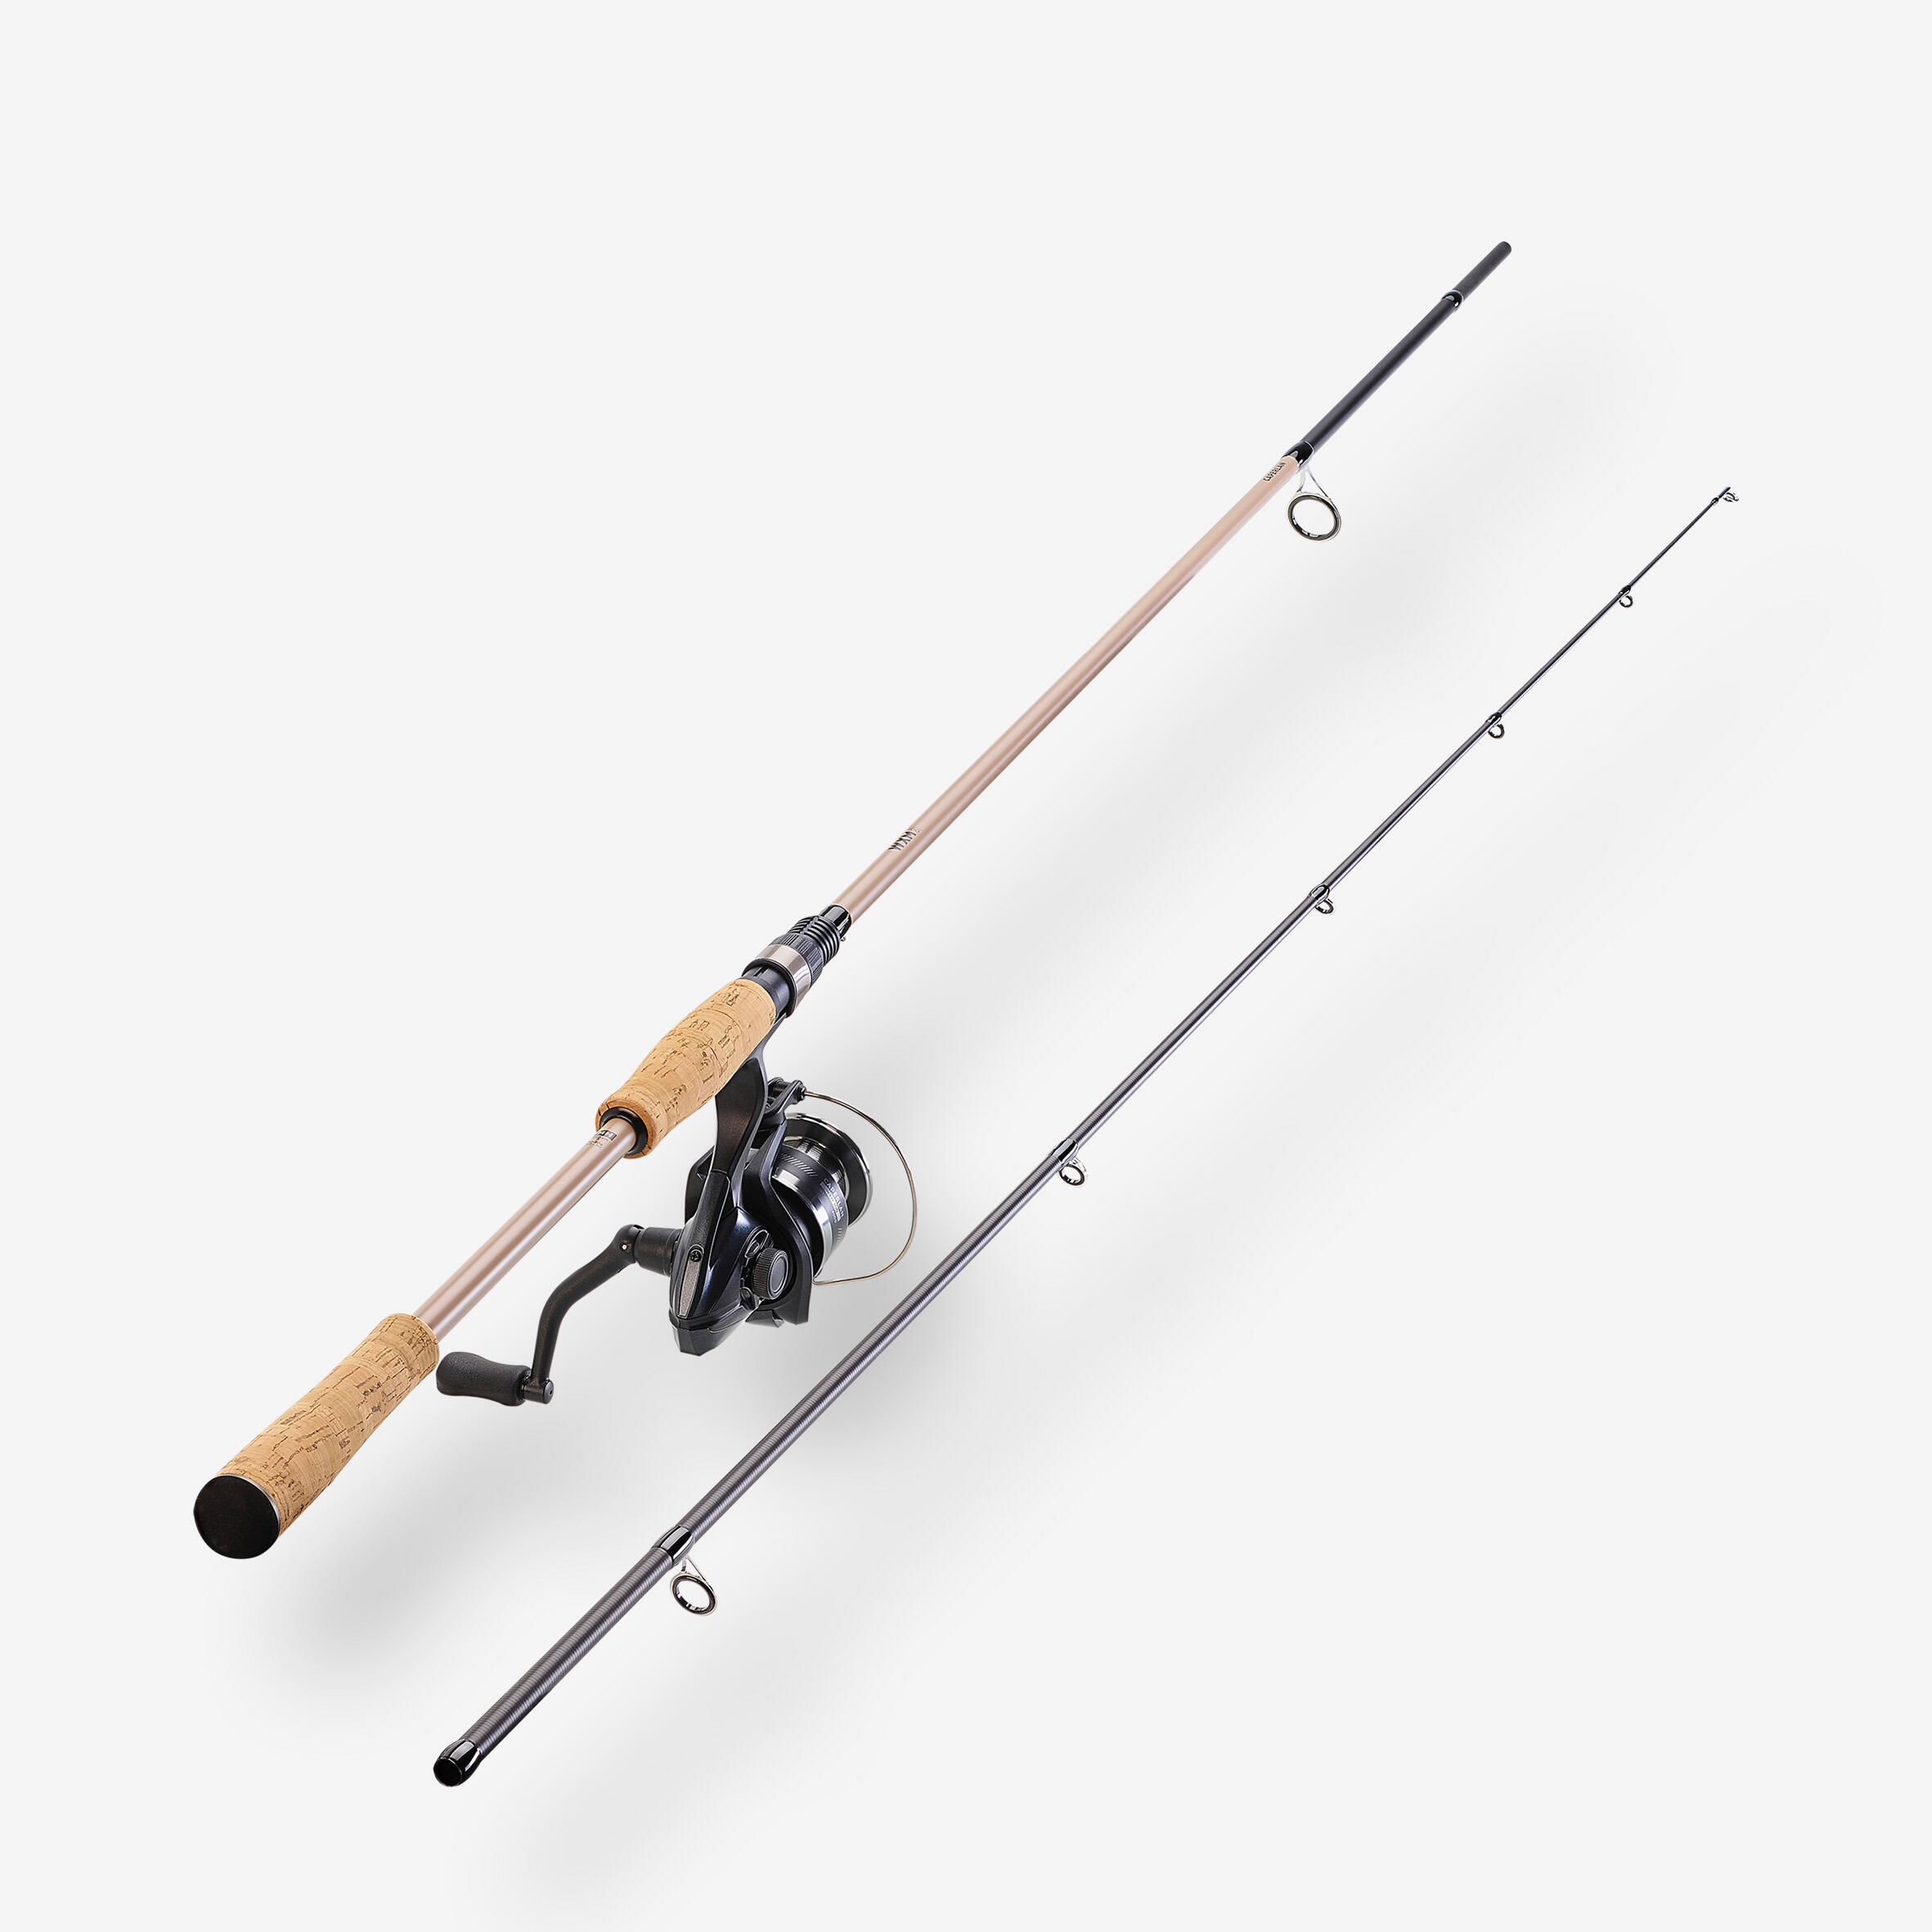 Cheap Spinning Fishing Rod 3m Feeder Fishing Rod Wooden Handle Outdoor  Sports Fishing Gear